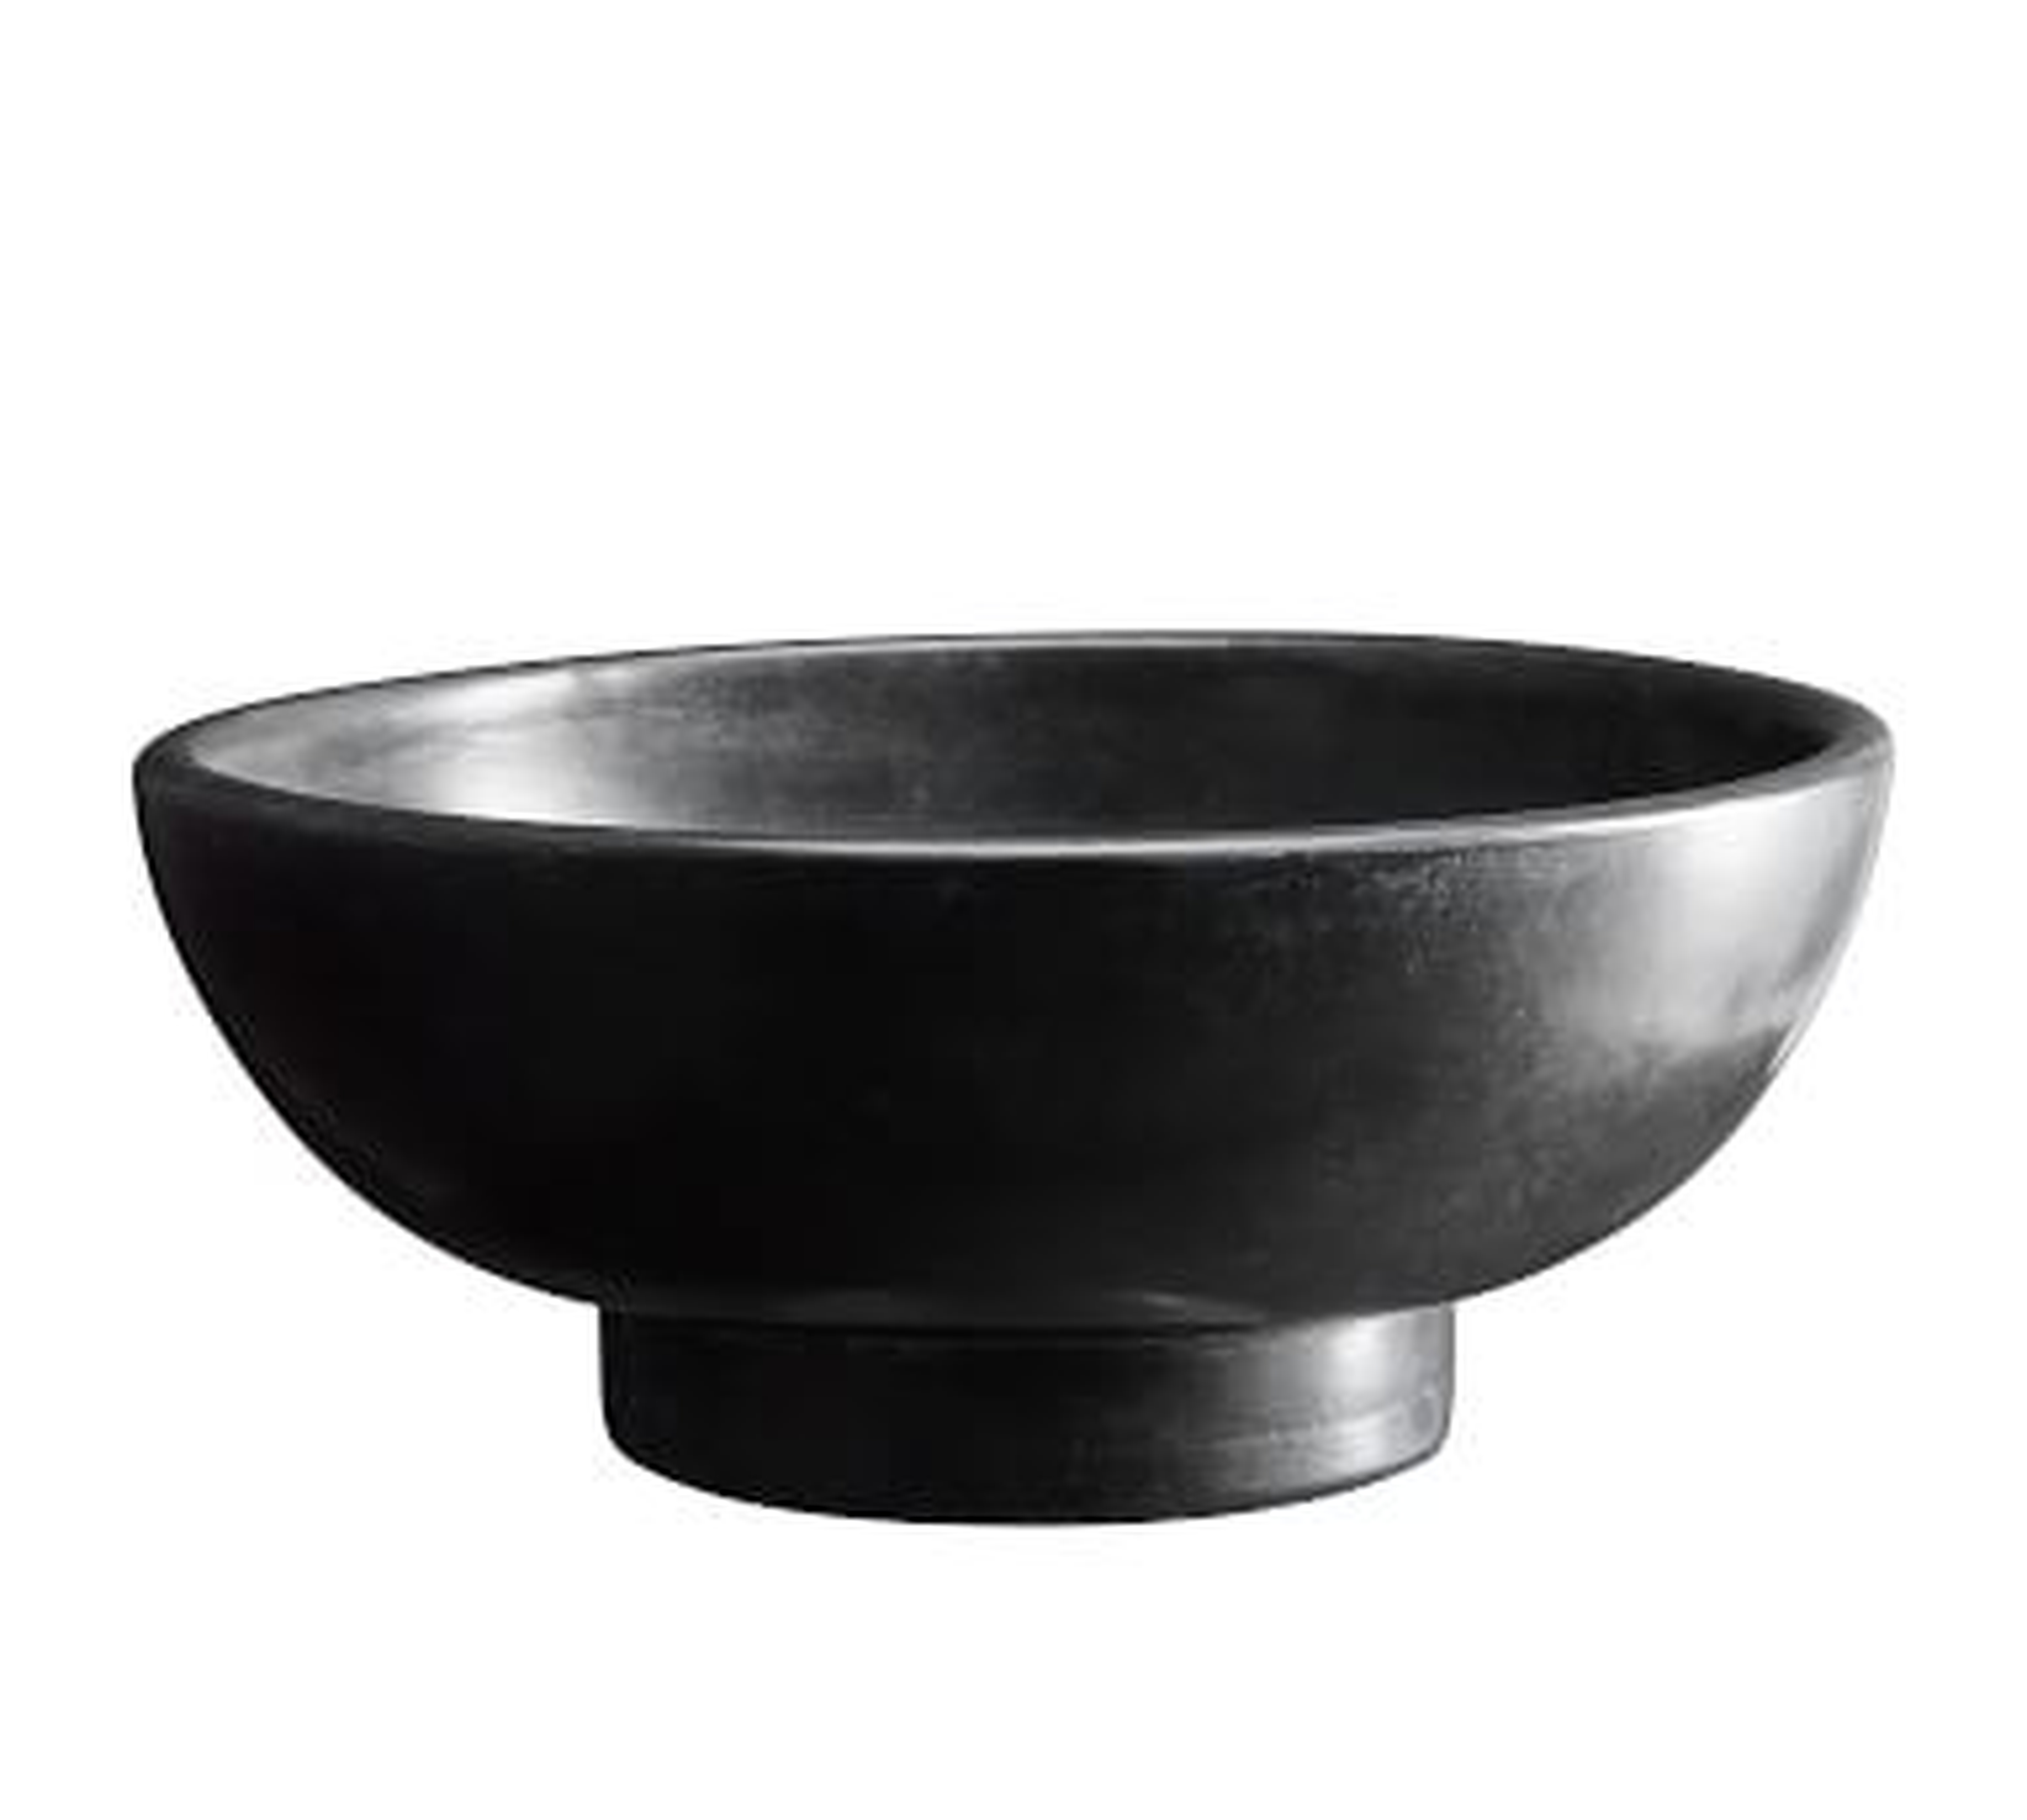 Orion Handcrafted Terracotta Bowl, Large, Black - Pottery Barn